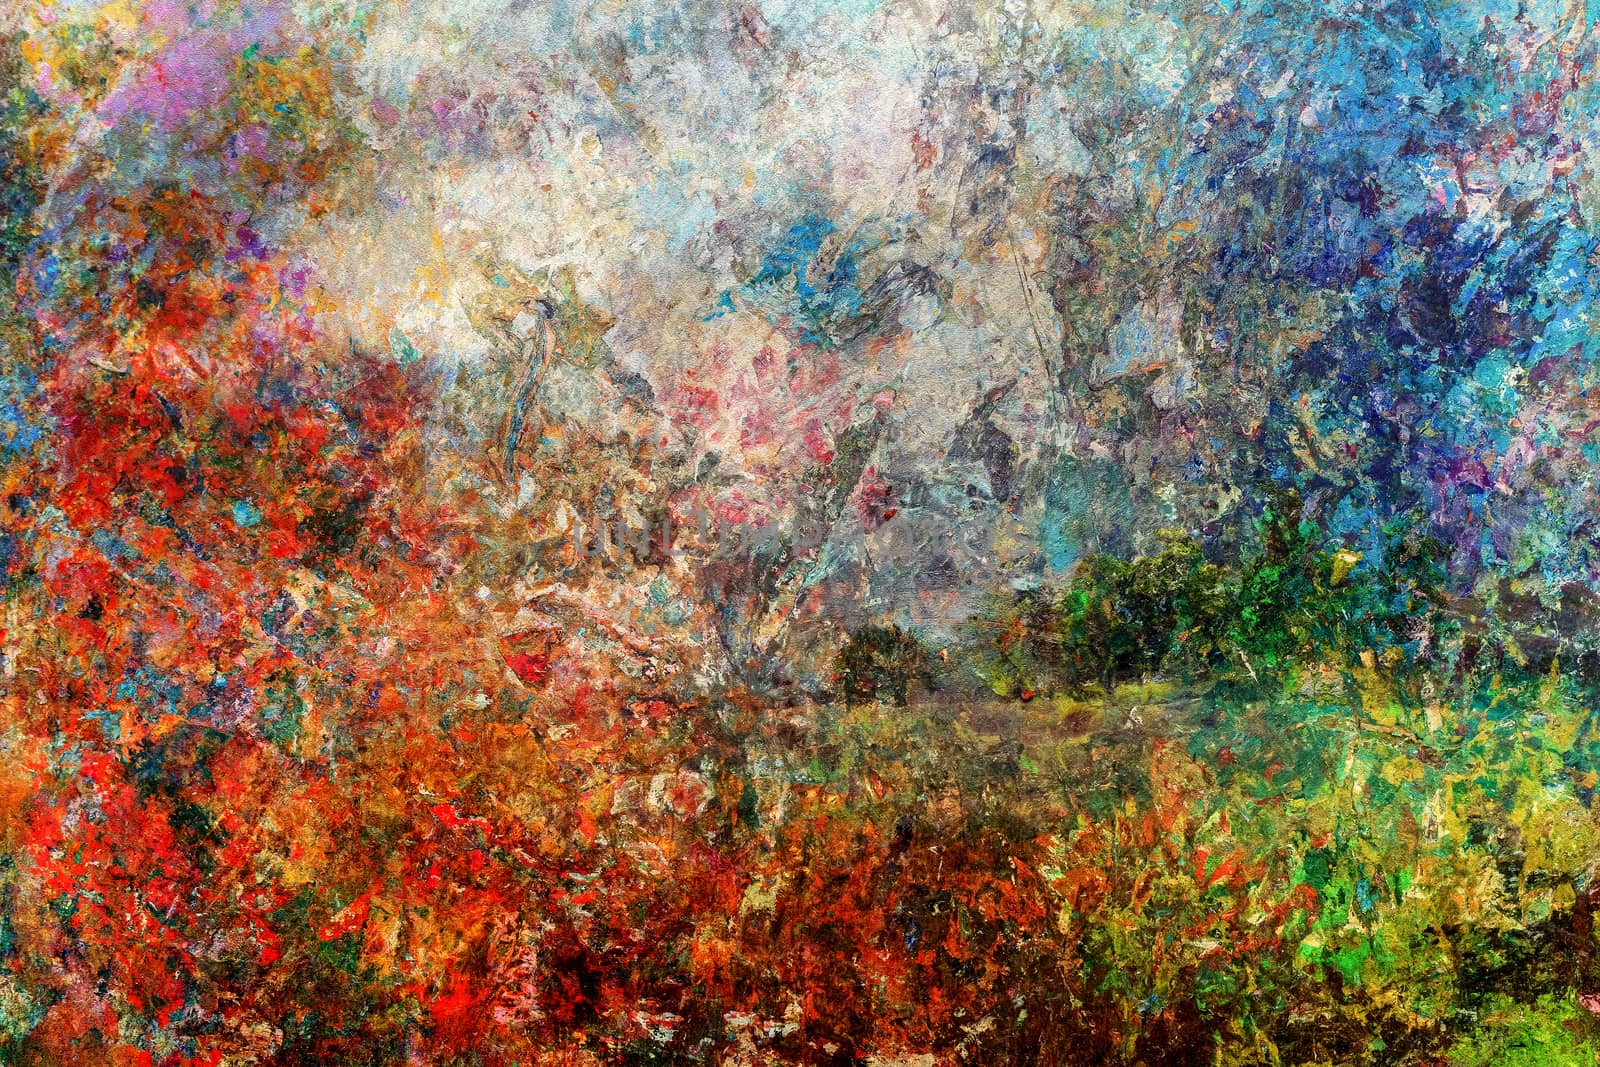 The artist's palette cleared of oil paints, creates the impression of an abstract picture.